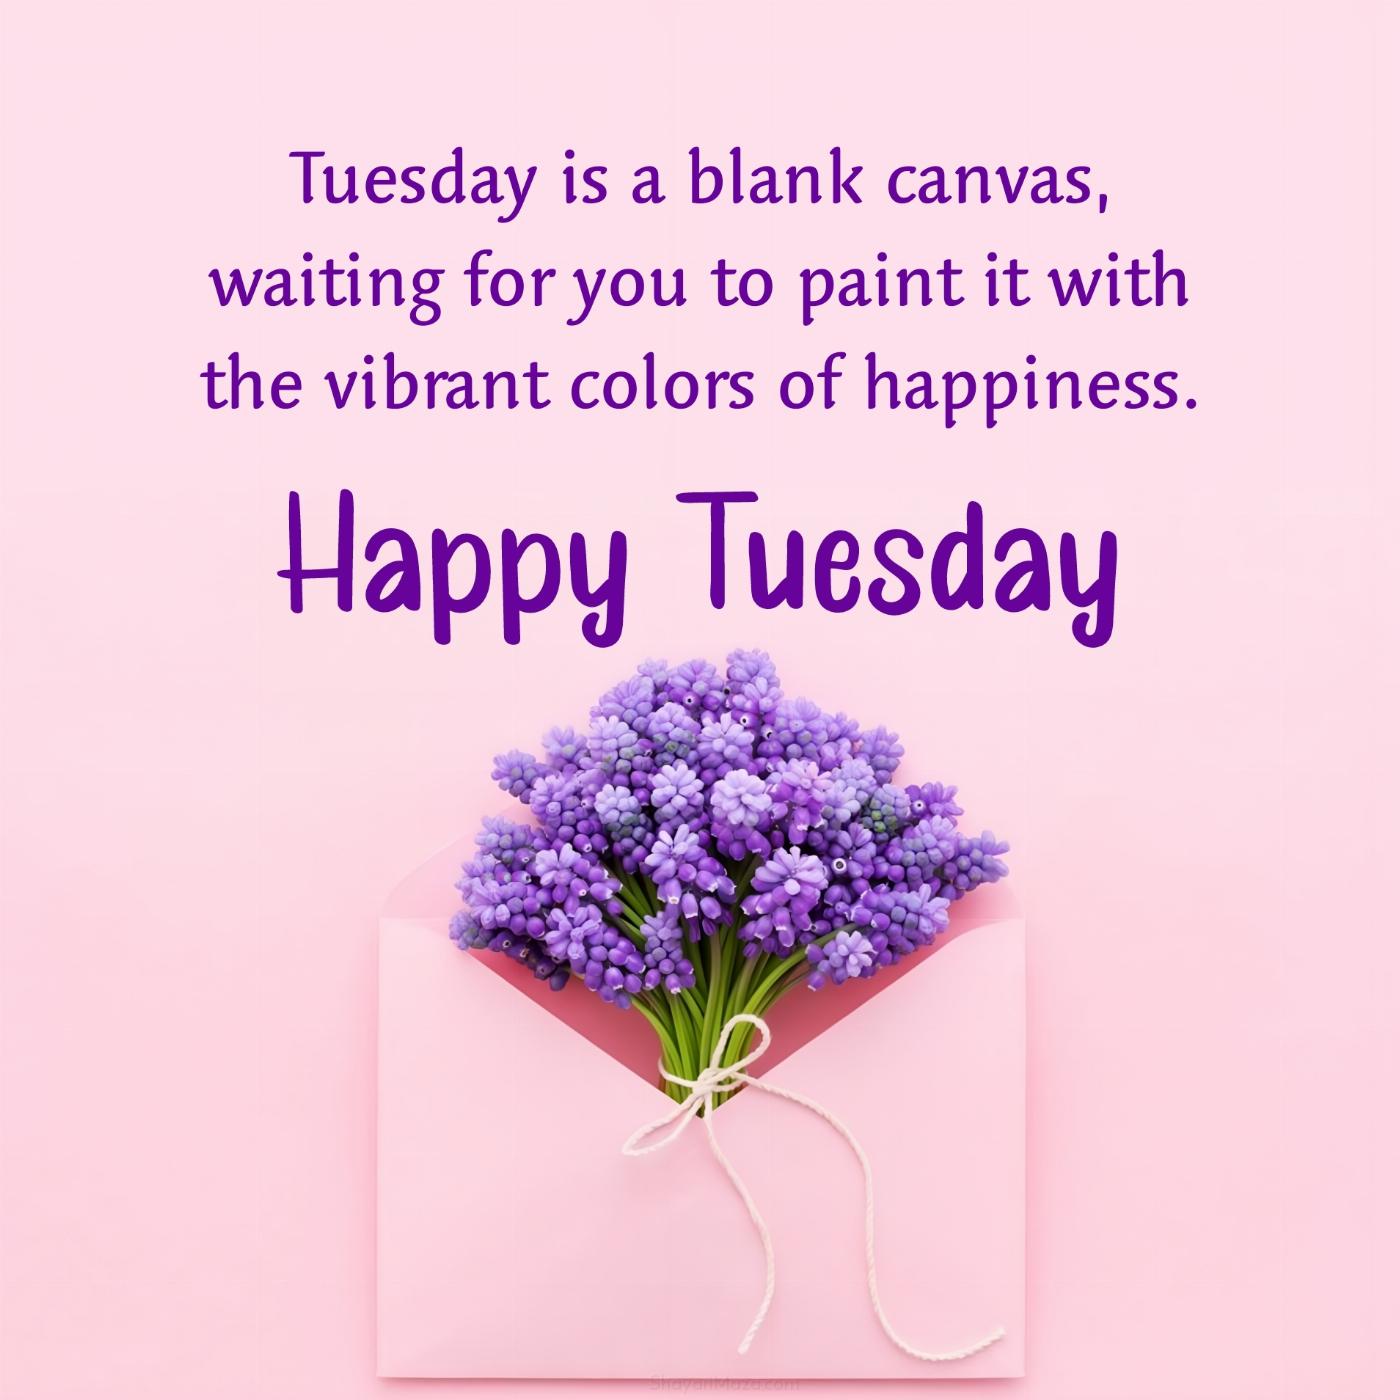 Tuesday is a blank canvas waiting for you to paint it